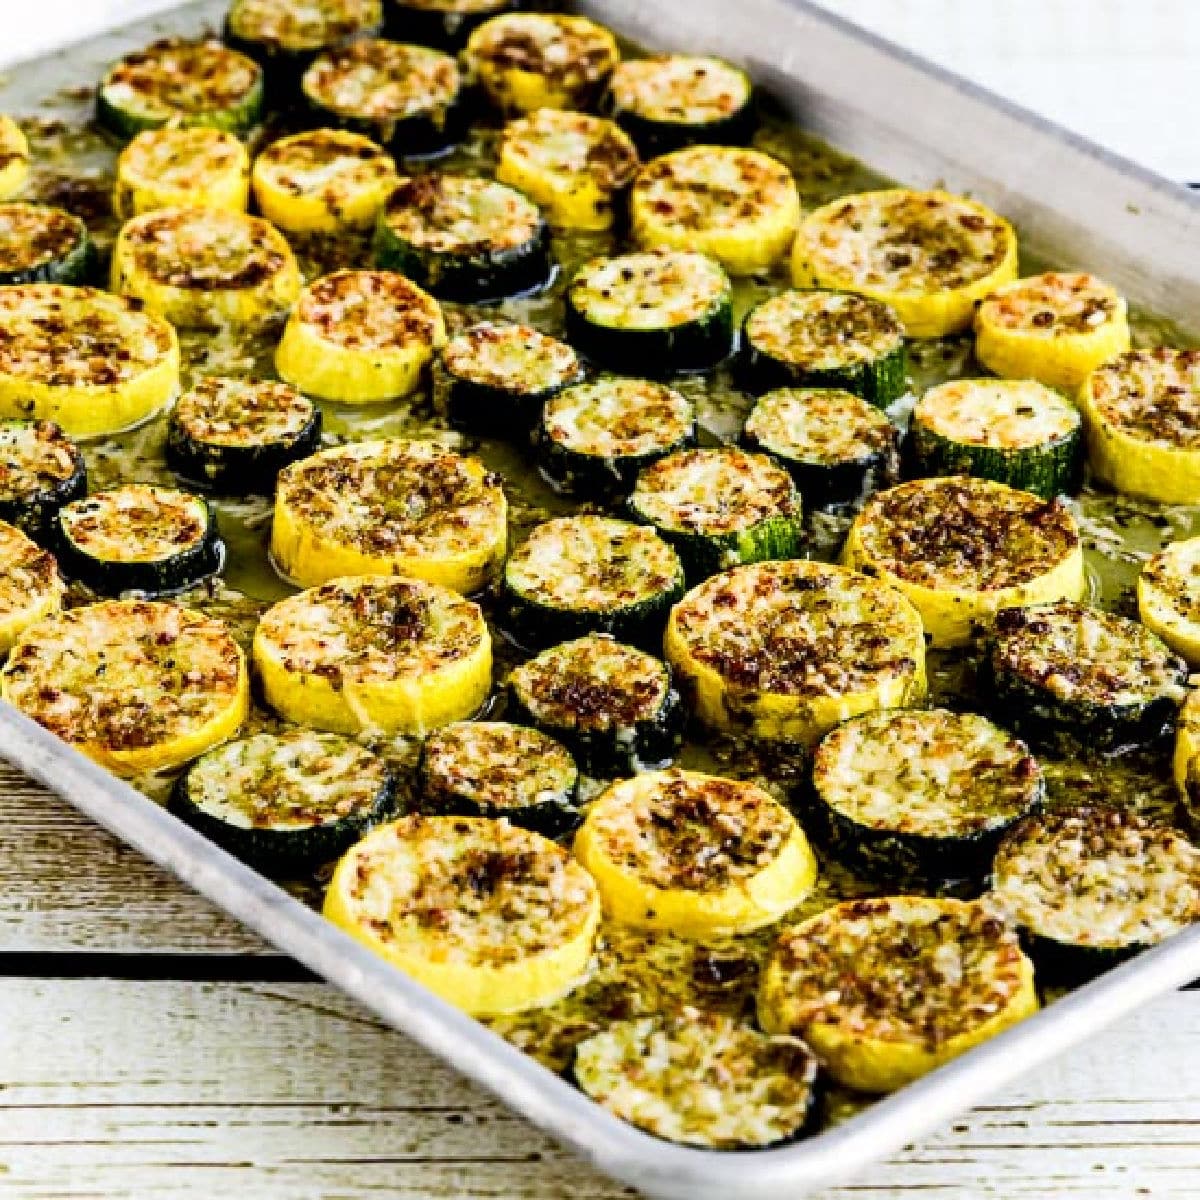 Square picture of summer squash with pesto and parmesan on baking tray